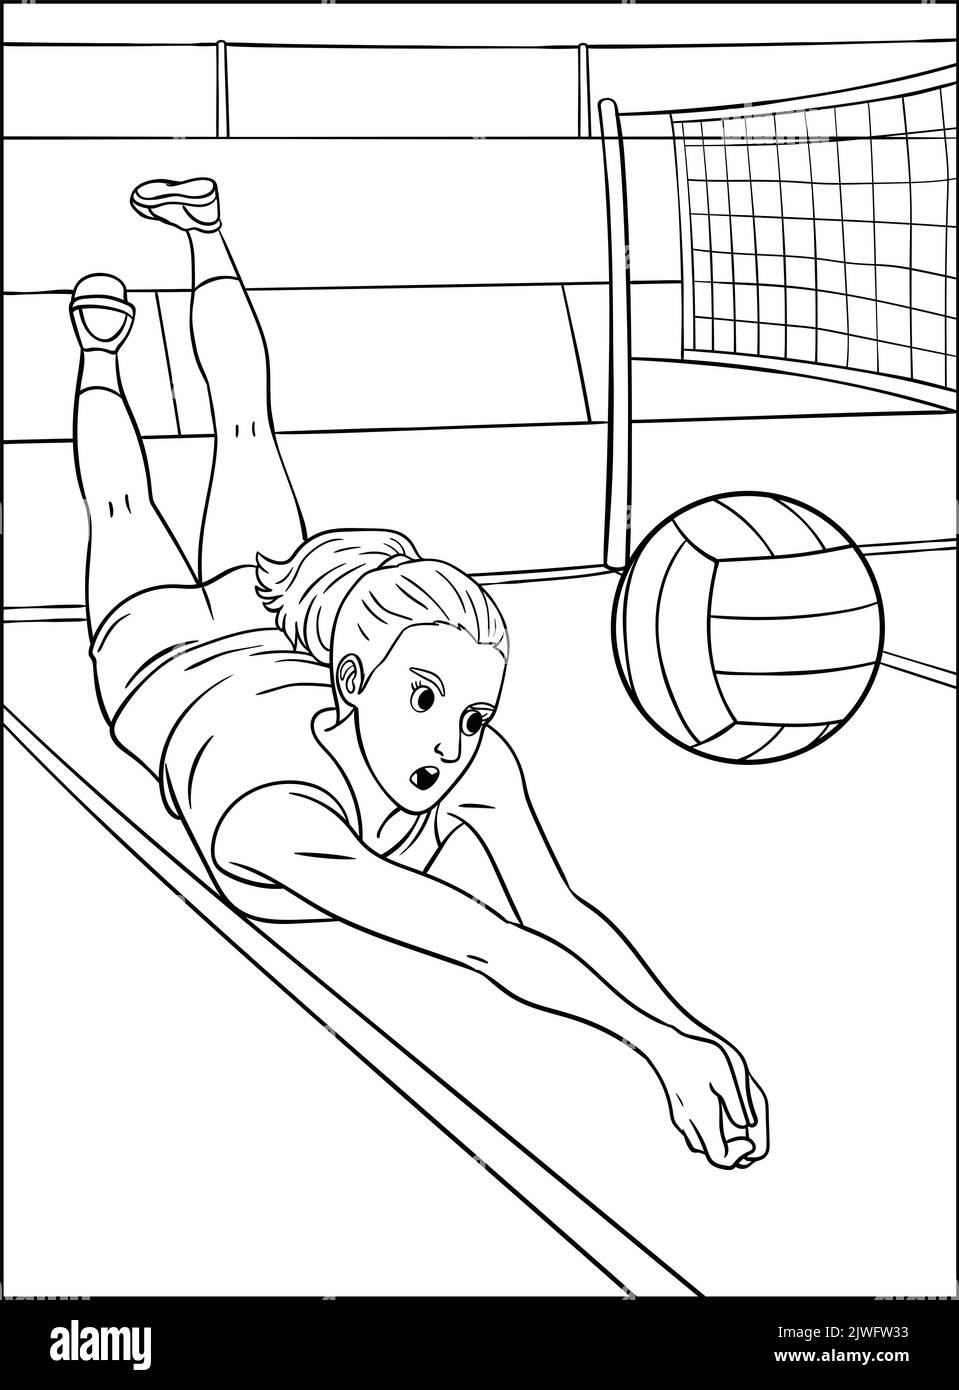 Volleyball Coloring Page for Kids Stock Vector